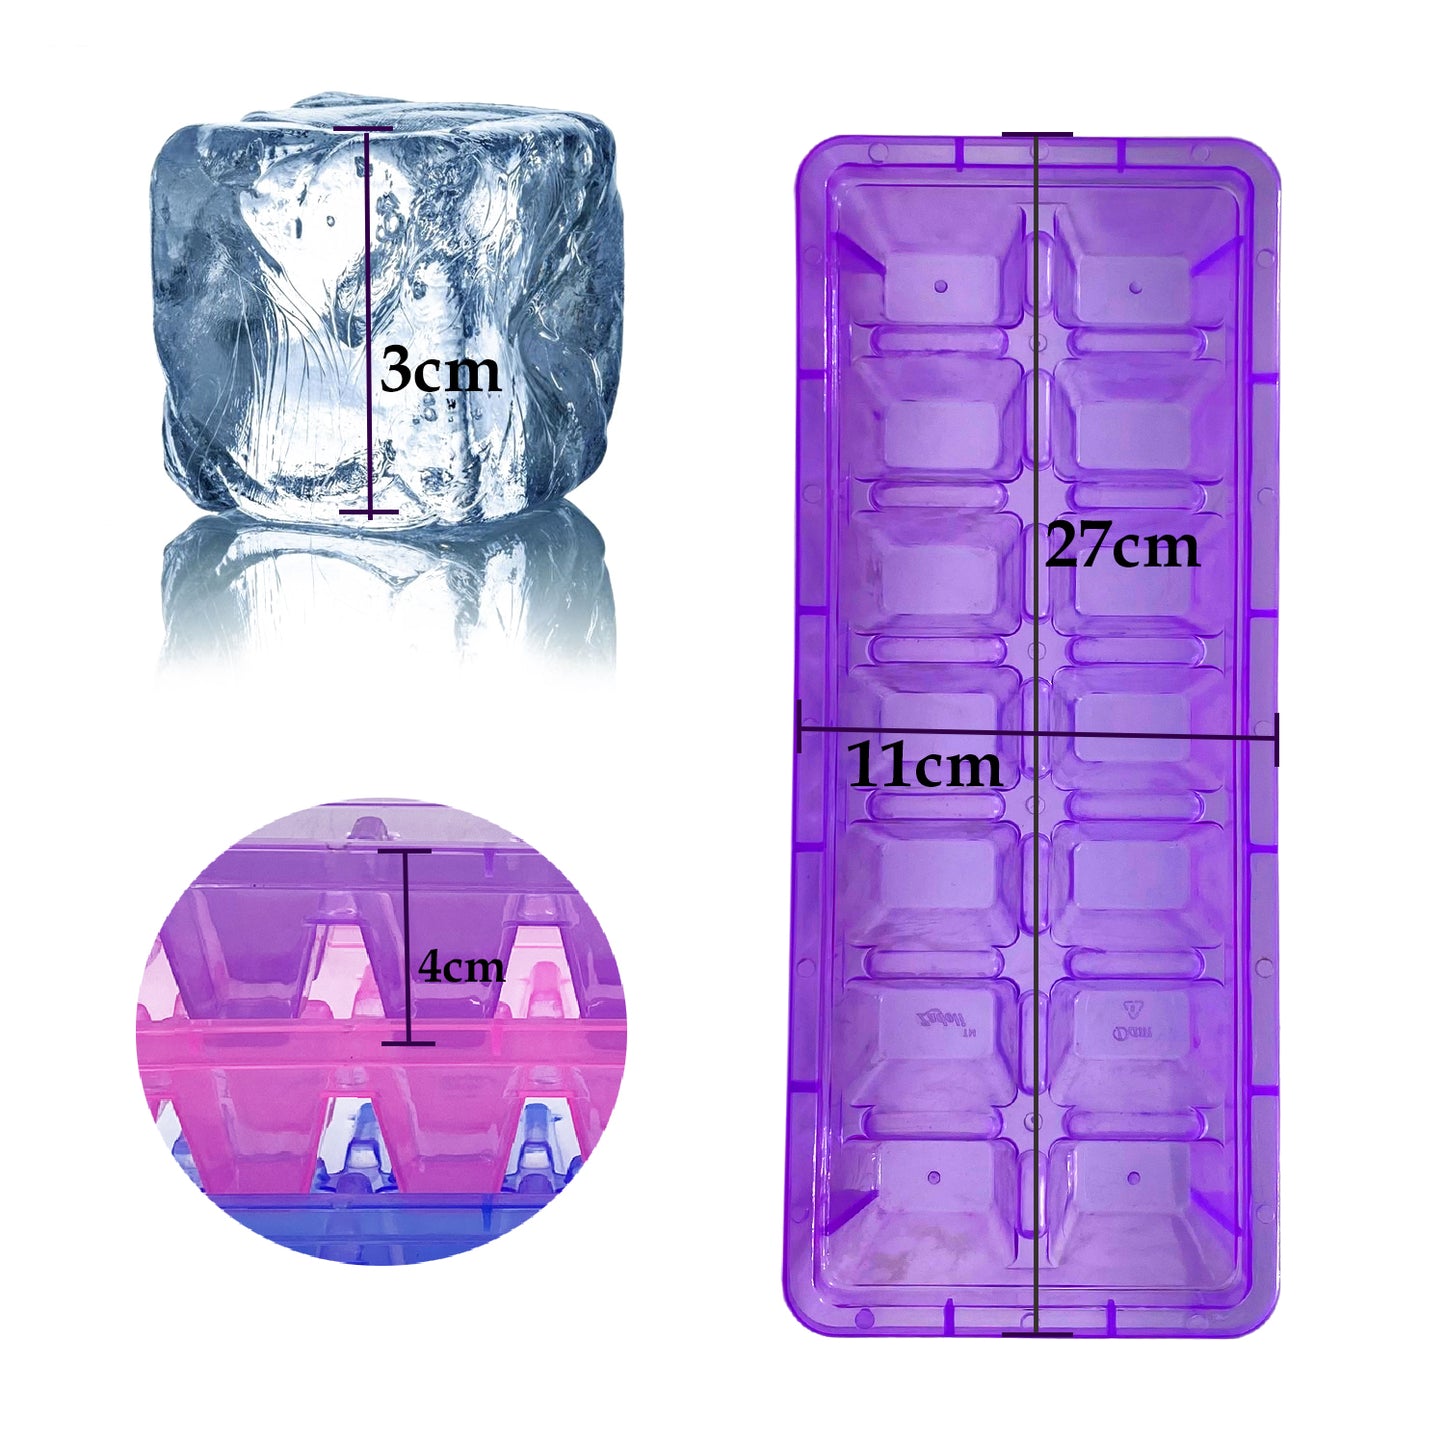 Plastic Ice Cube Trays for Freezer - BPA Free Plastic - 14 Classic-Size Ice Cubes Per Tray with Easy-Release Design - Multicolor